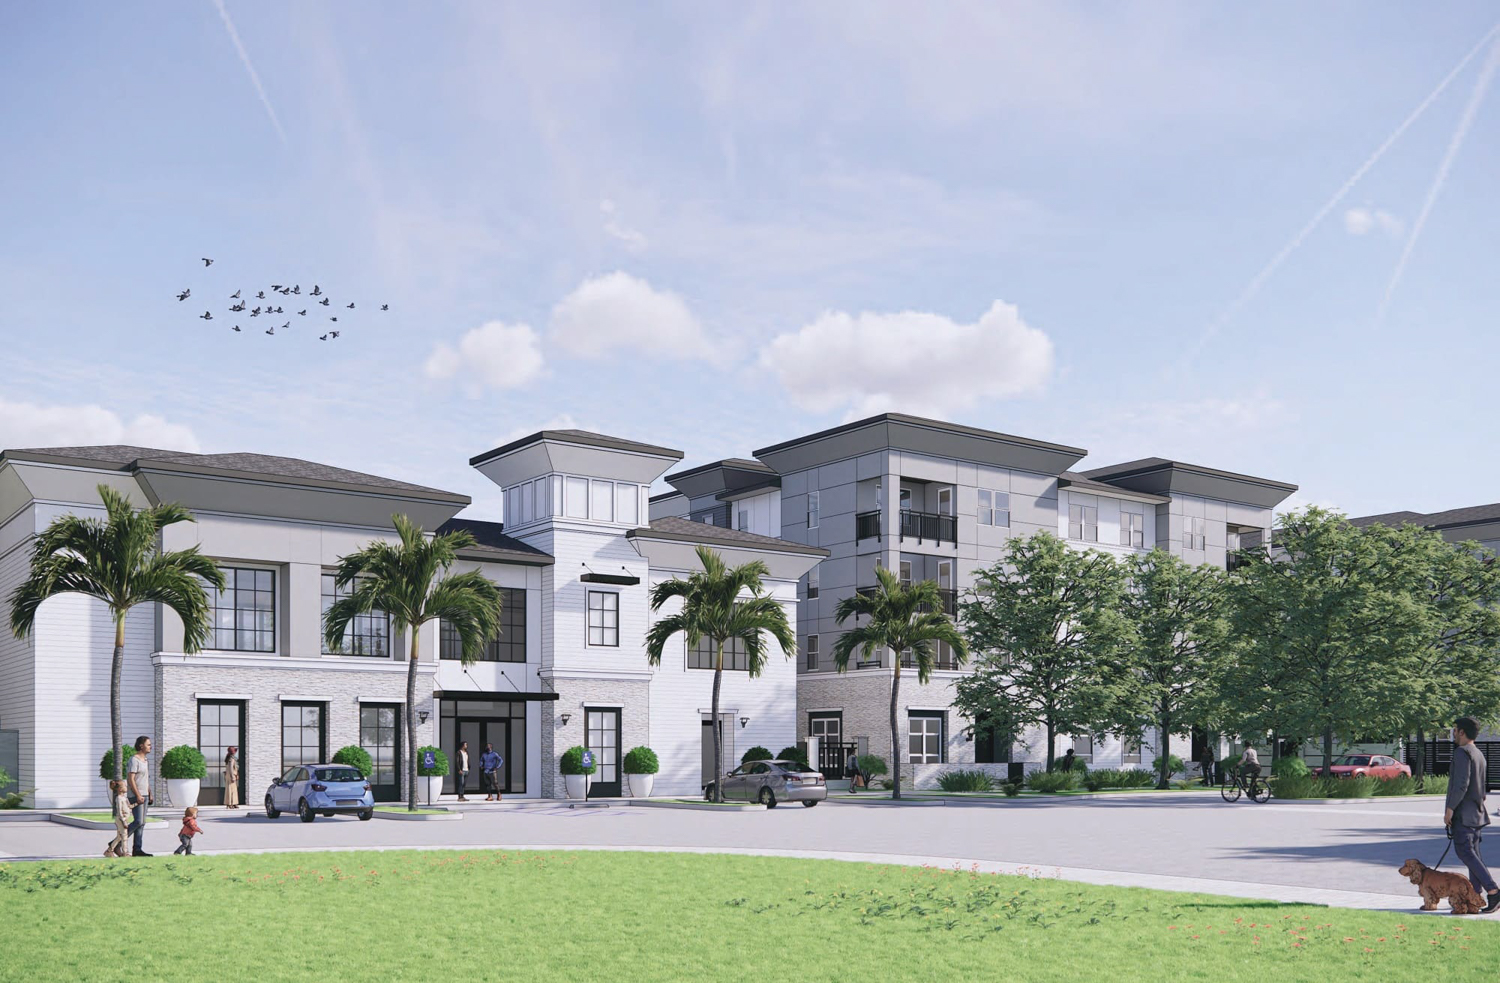 5180 Sonoma Boulevard amenity building view from the parking lot, rendering by TCA